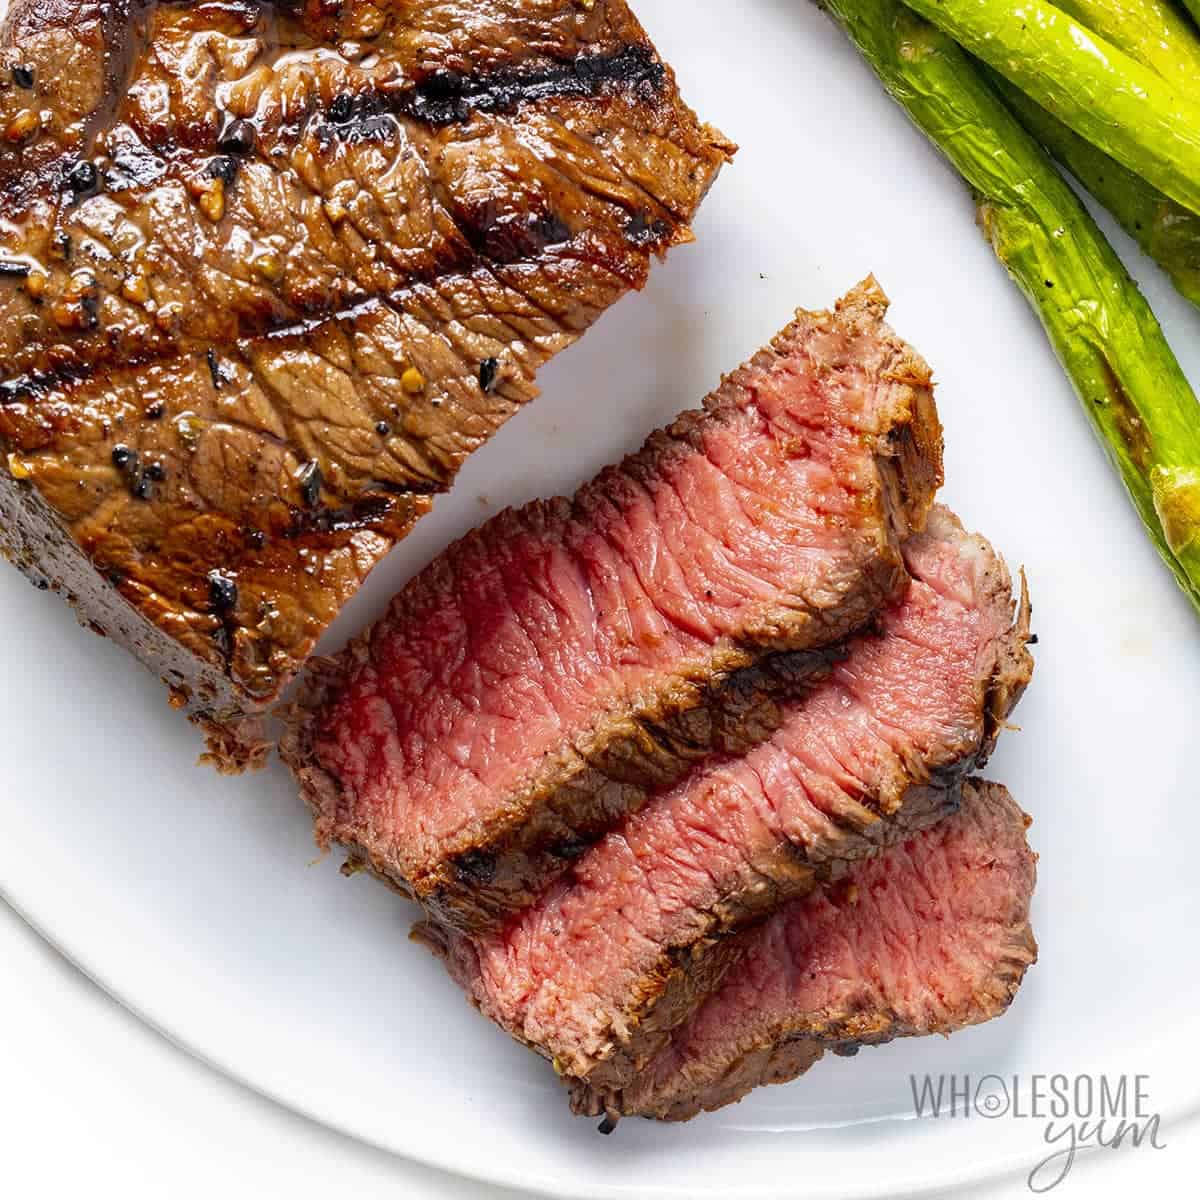 Rested grilled sirloin steak on a plate.